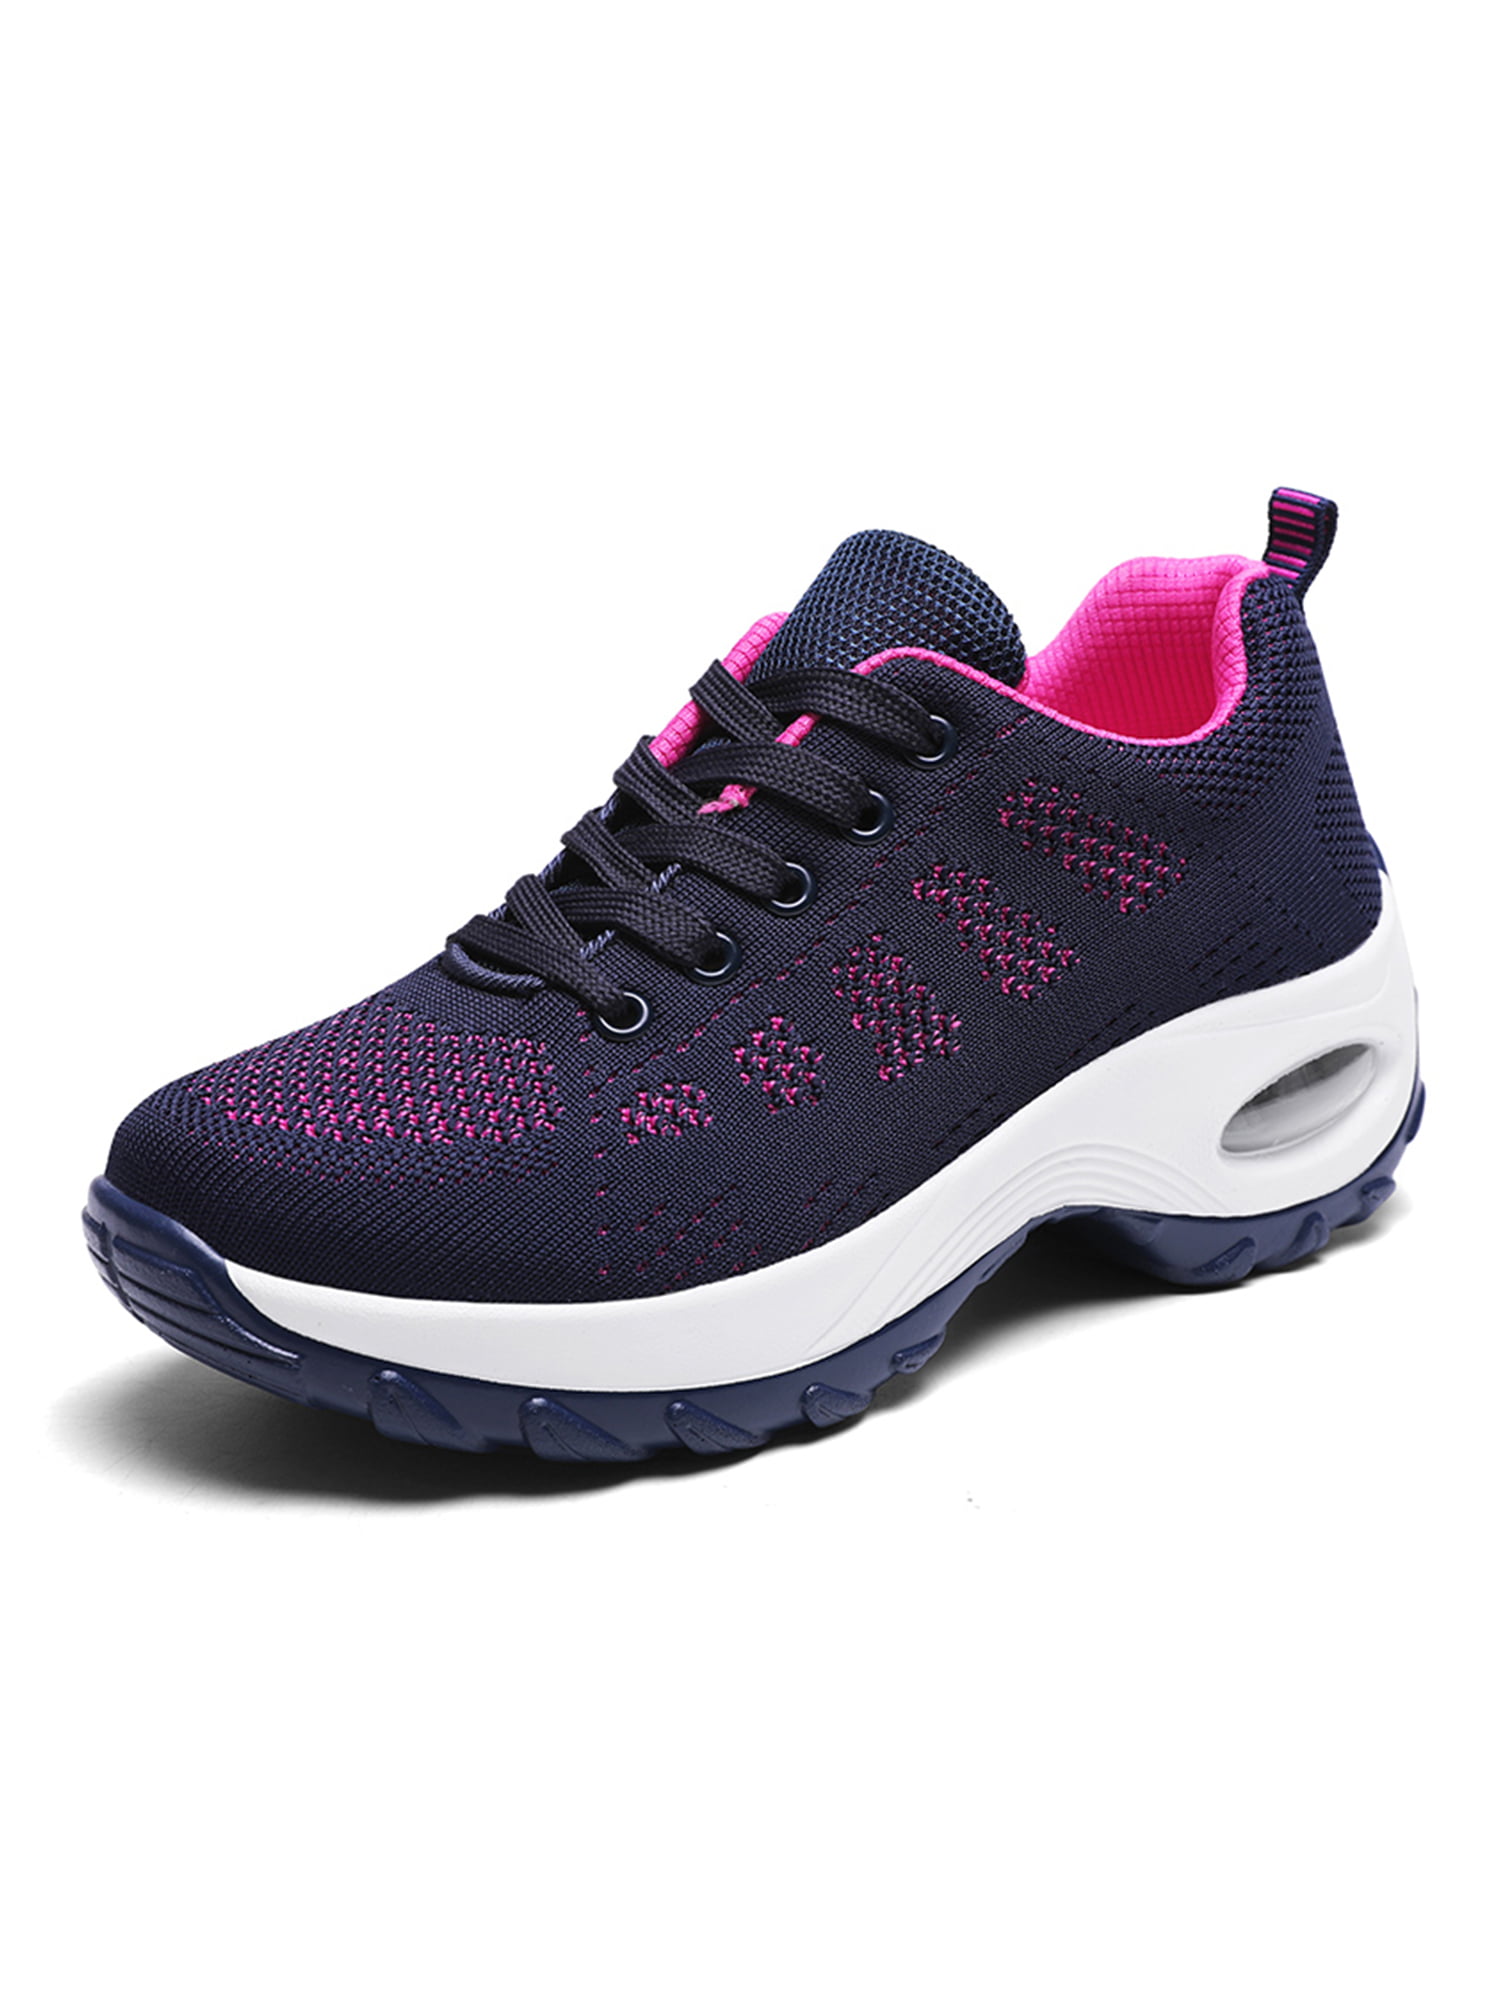 Own Shoe - Women's Casual Athletic Shoes New Fashion Trends Mesh ...